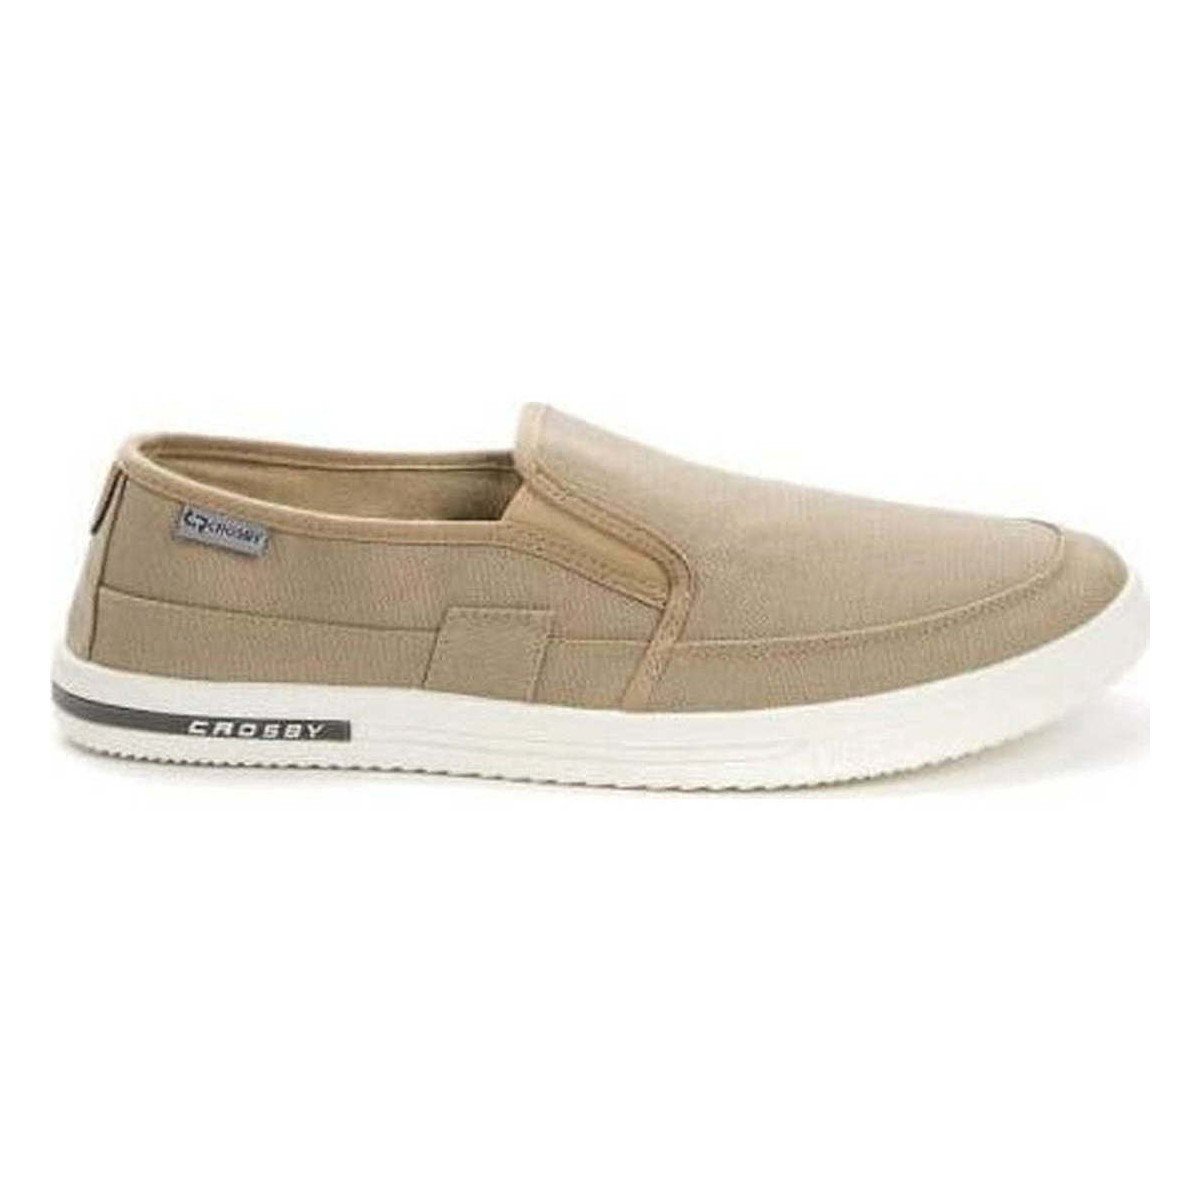 Chaussures Homme Baskets basses Crosby beige casual closed shoes Beige